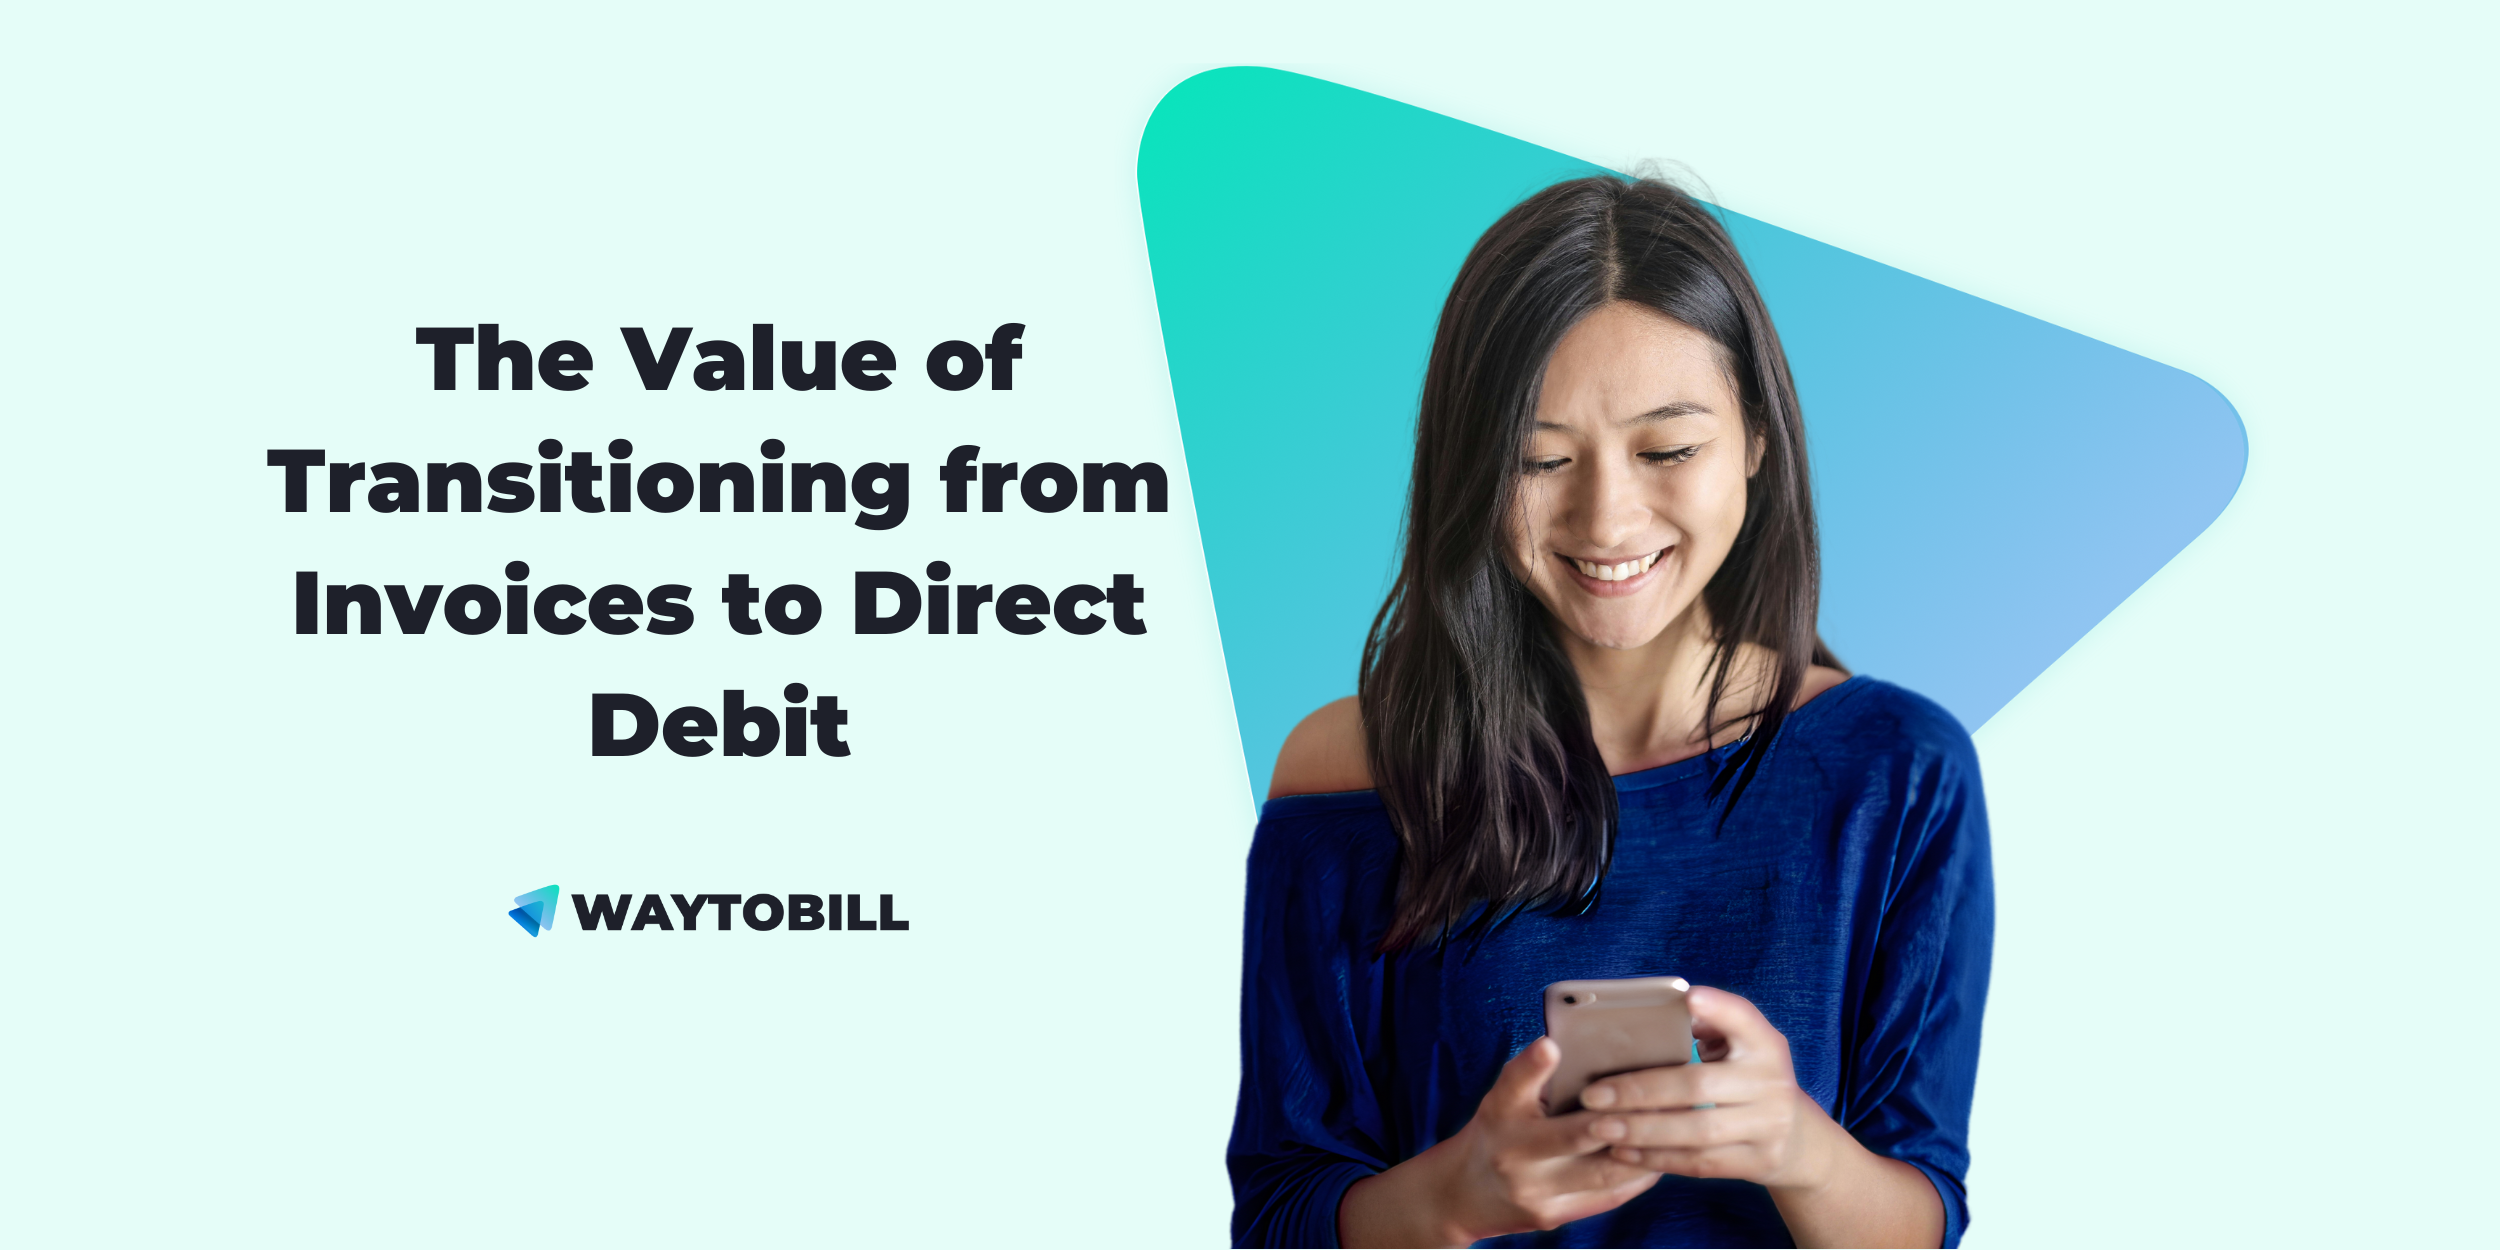 The Value of Transitioning from Invoices to Direct Debit